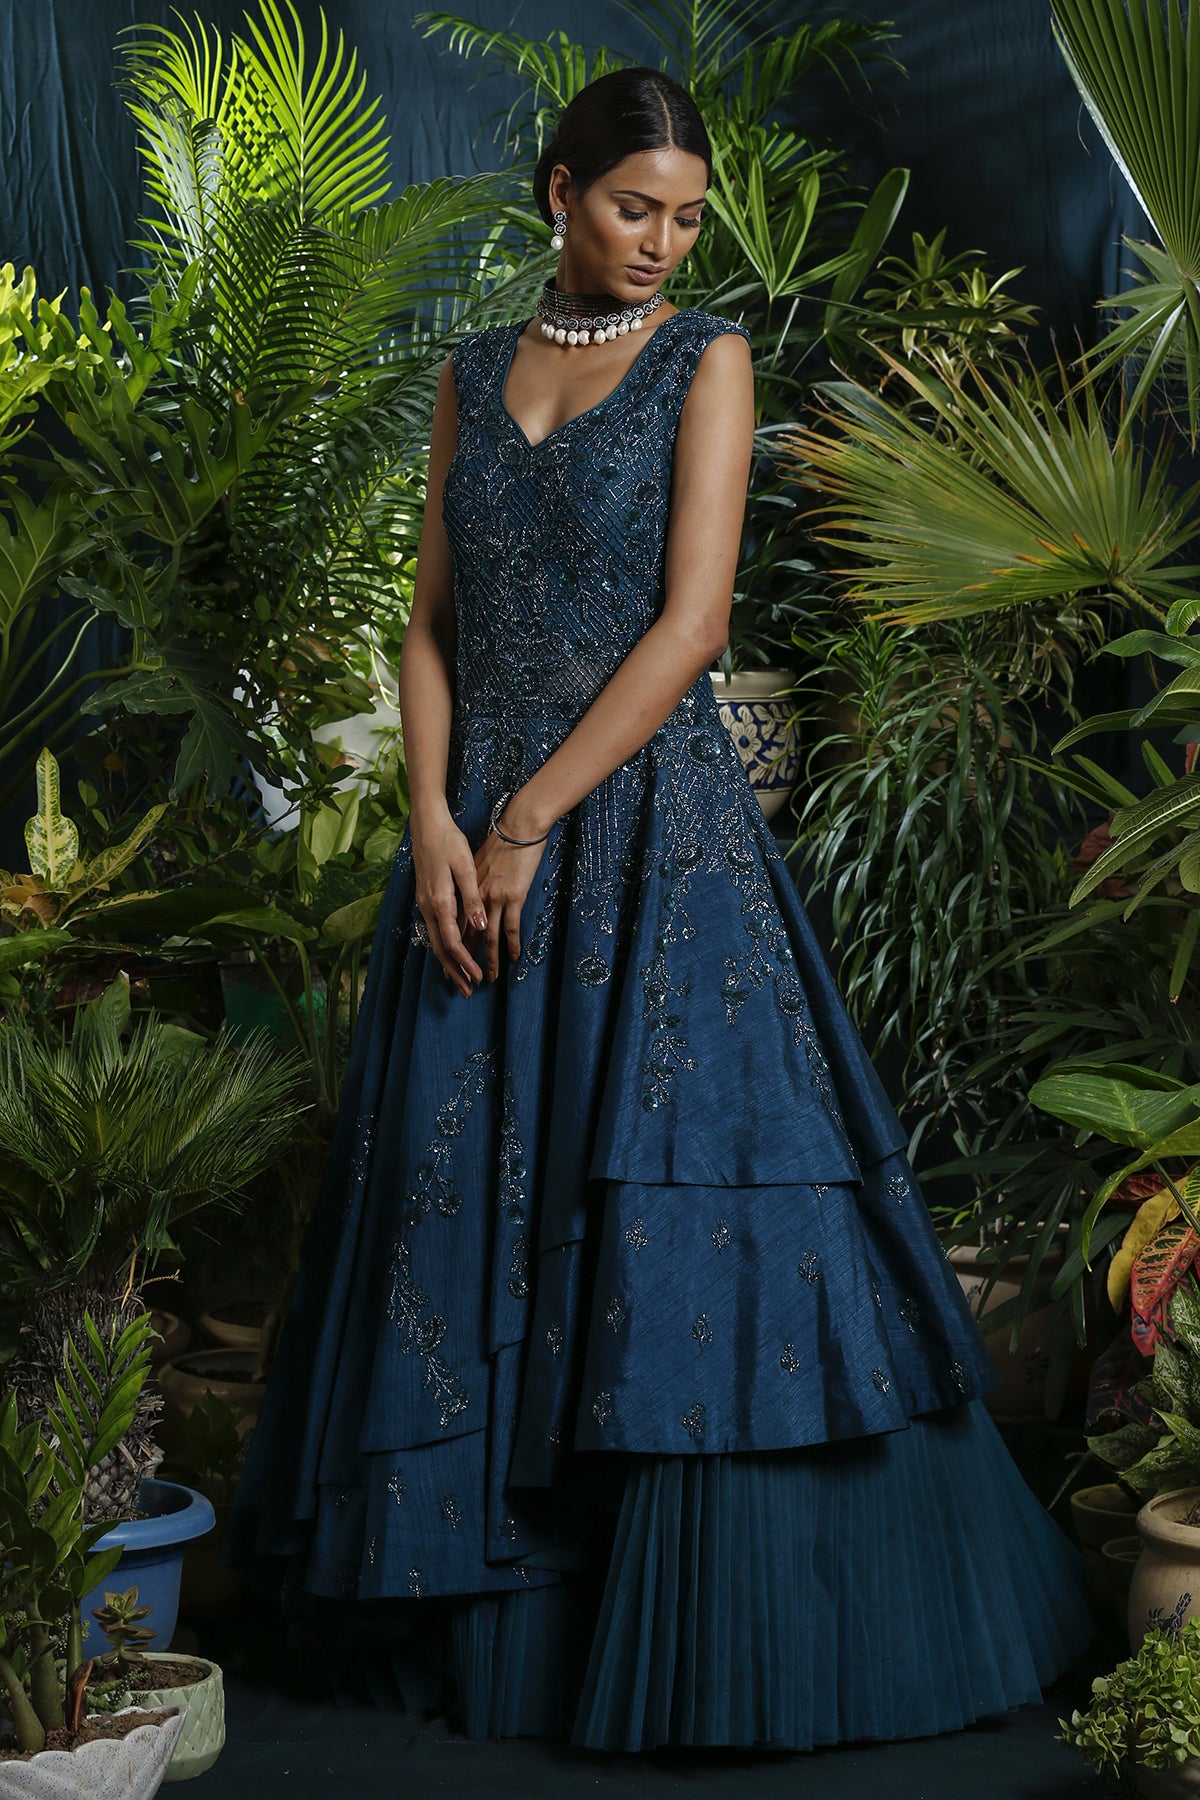 Peacock Triple Layer Gown